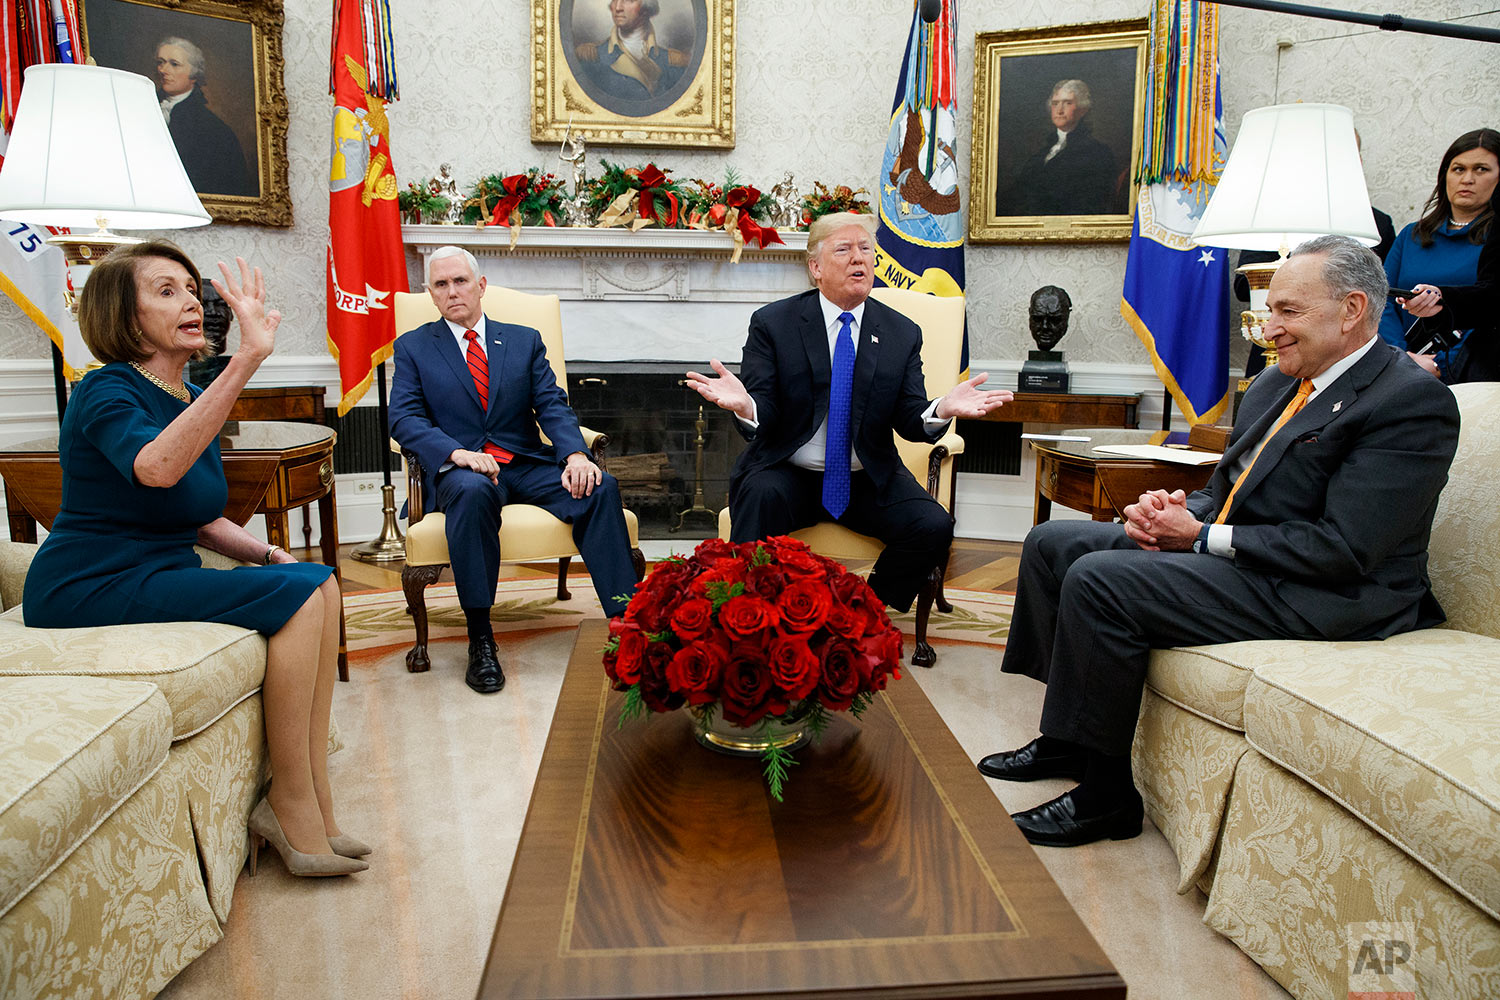  President Donald Trump and Vice President Mike Pence meet with Senate Minority Leader Chuck Schumer, D-N.Y., and House Minority Leader Nancy Pelosi, D-Calif., in the Oval Office of the White House, Tuesday, Dec. 11, 2018, in Washington. (AP Photo/Ev